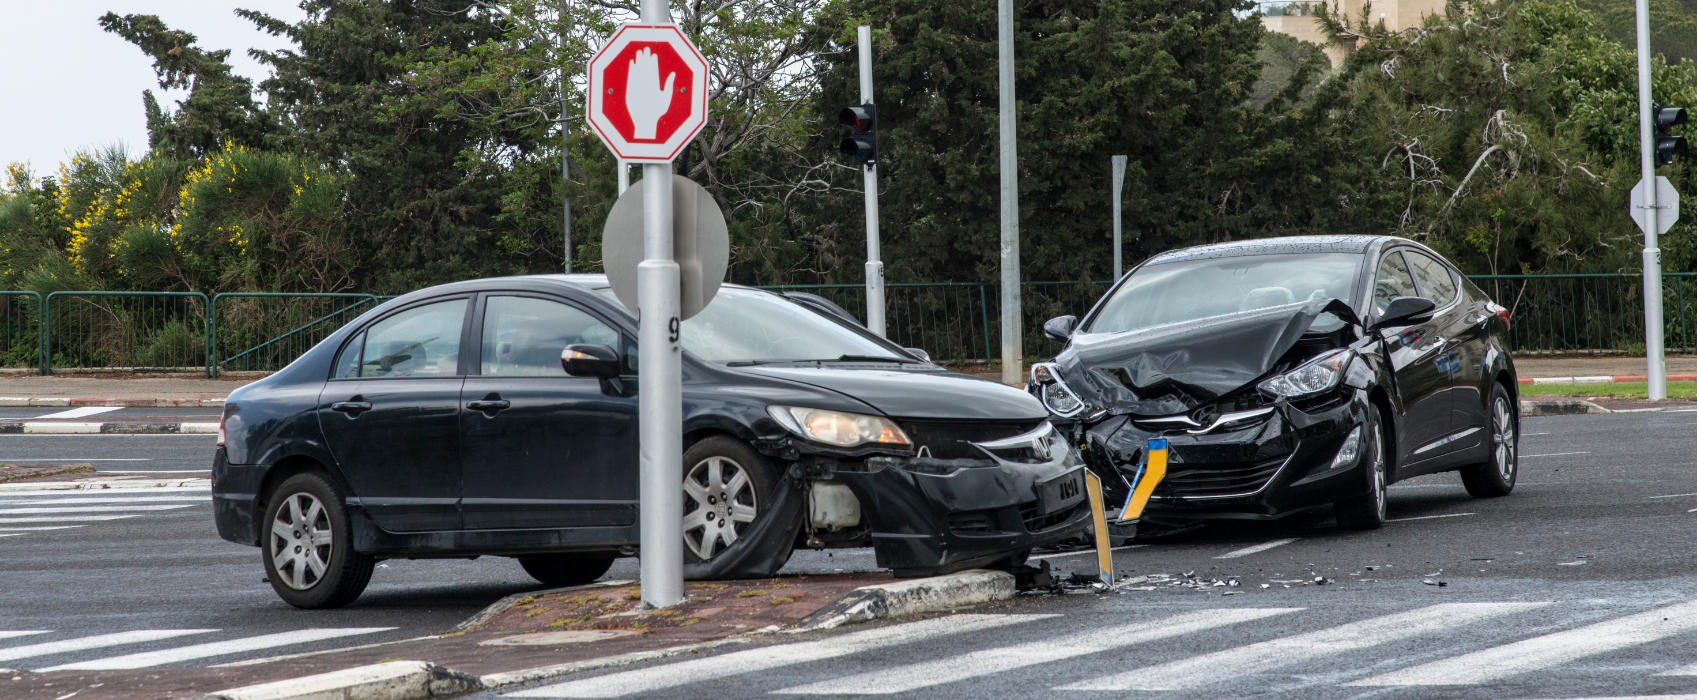 car accident at an intersection, Conyers Car Accident Lawyers | Car Accident Attorneys in Conyers